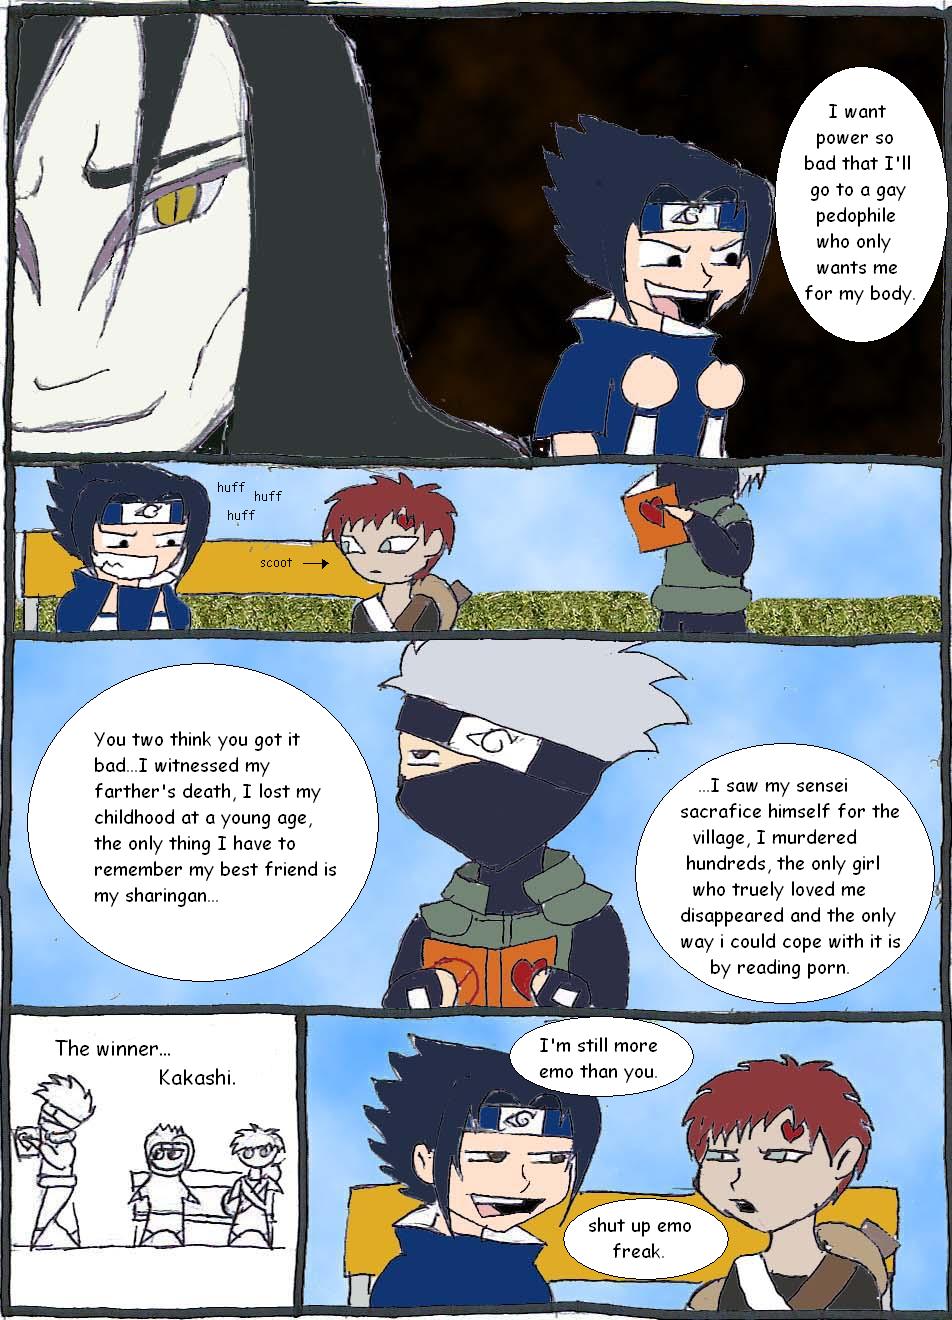 The Ultimate Emo pg.2 by kashiangel07